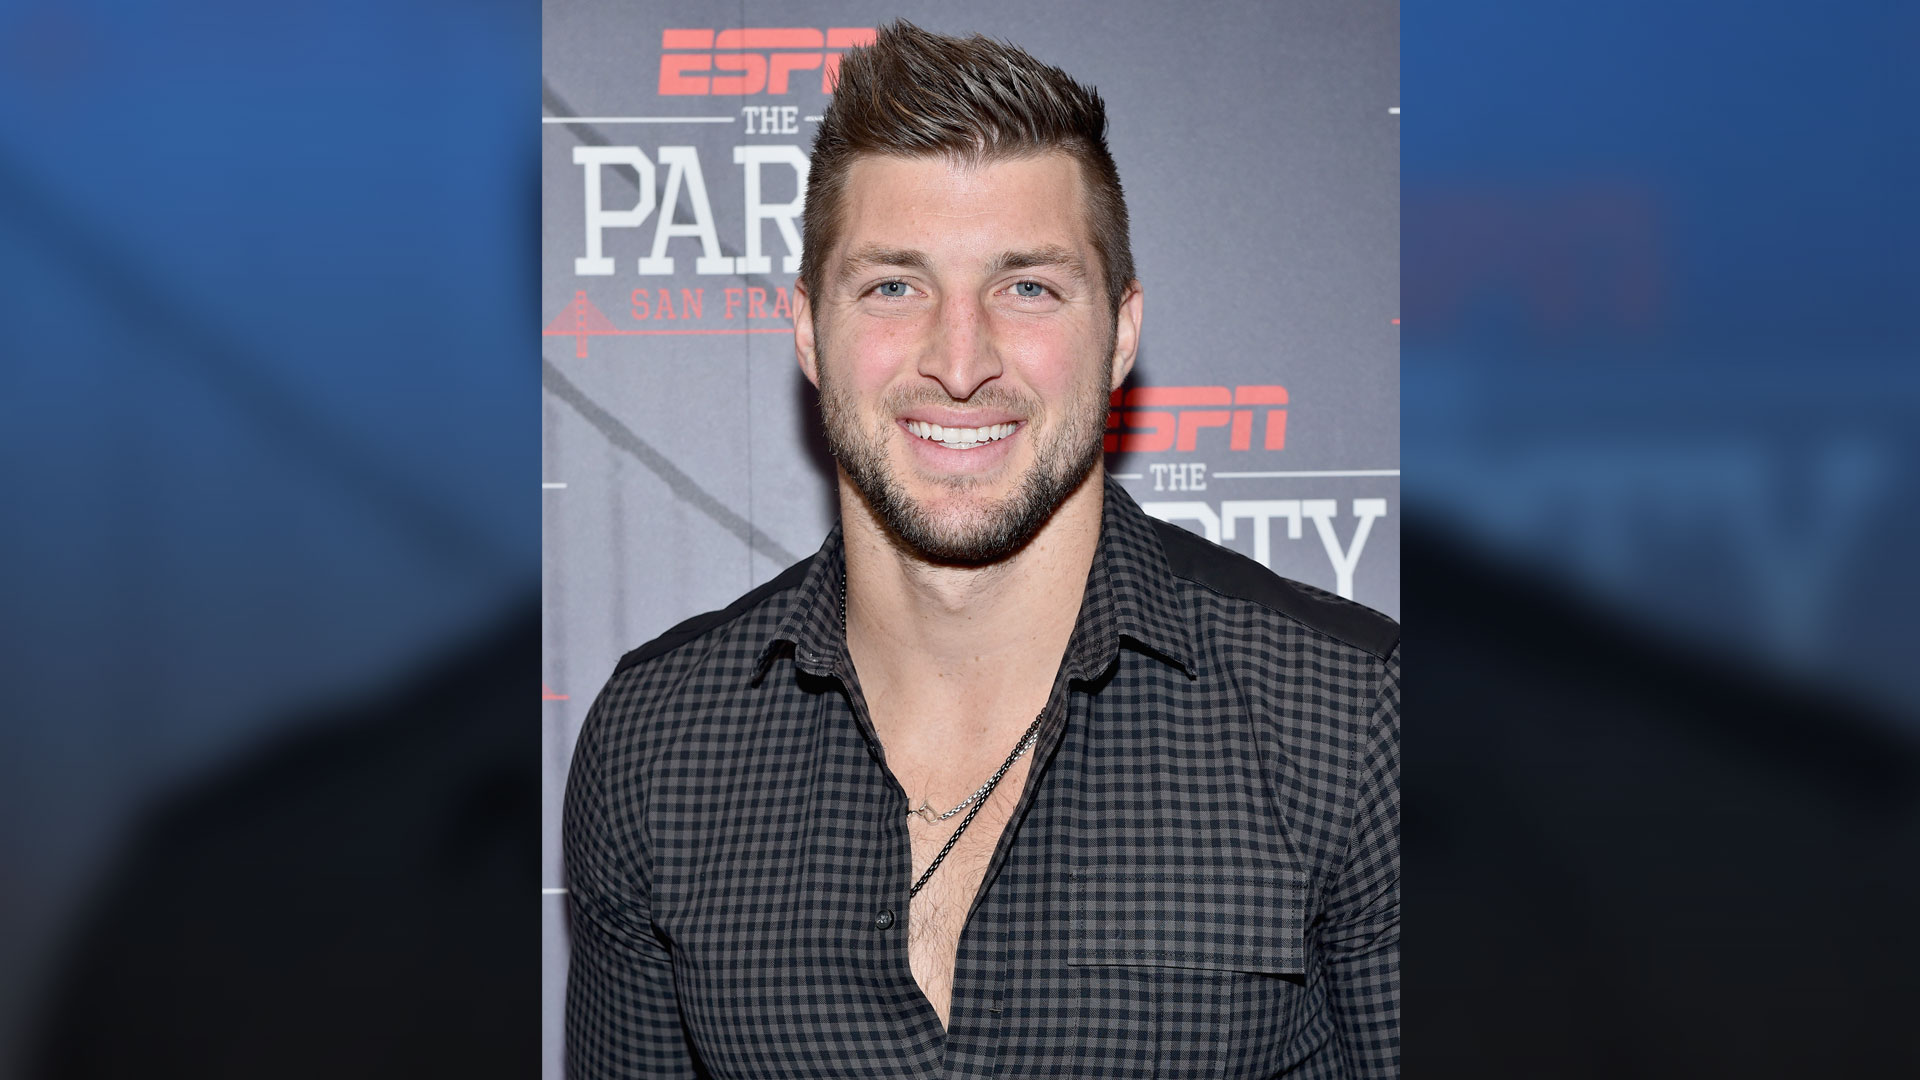 When will Tim Tebow play in the majors? - ESPN